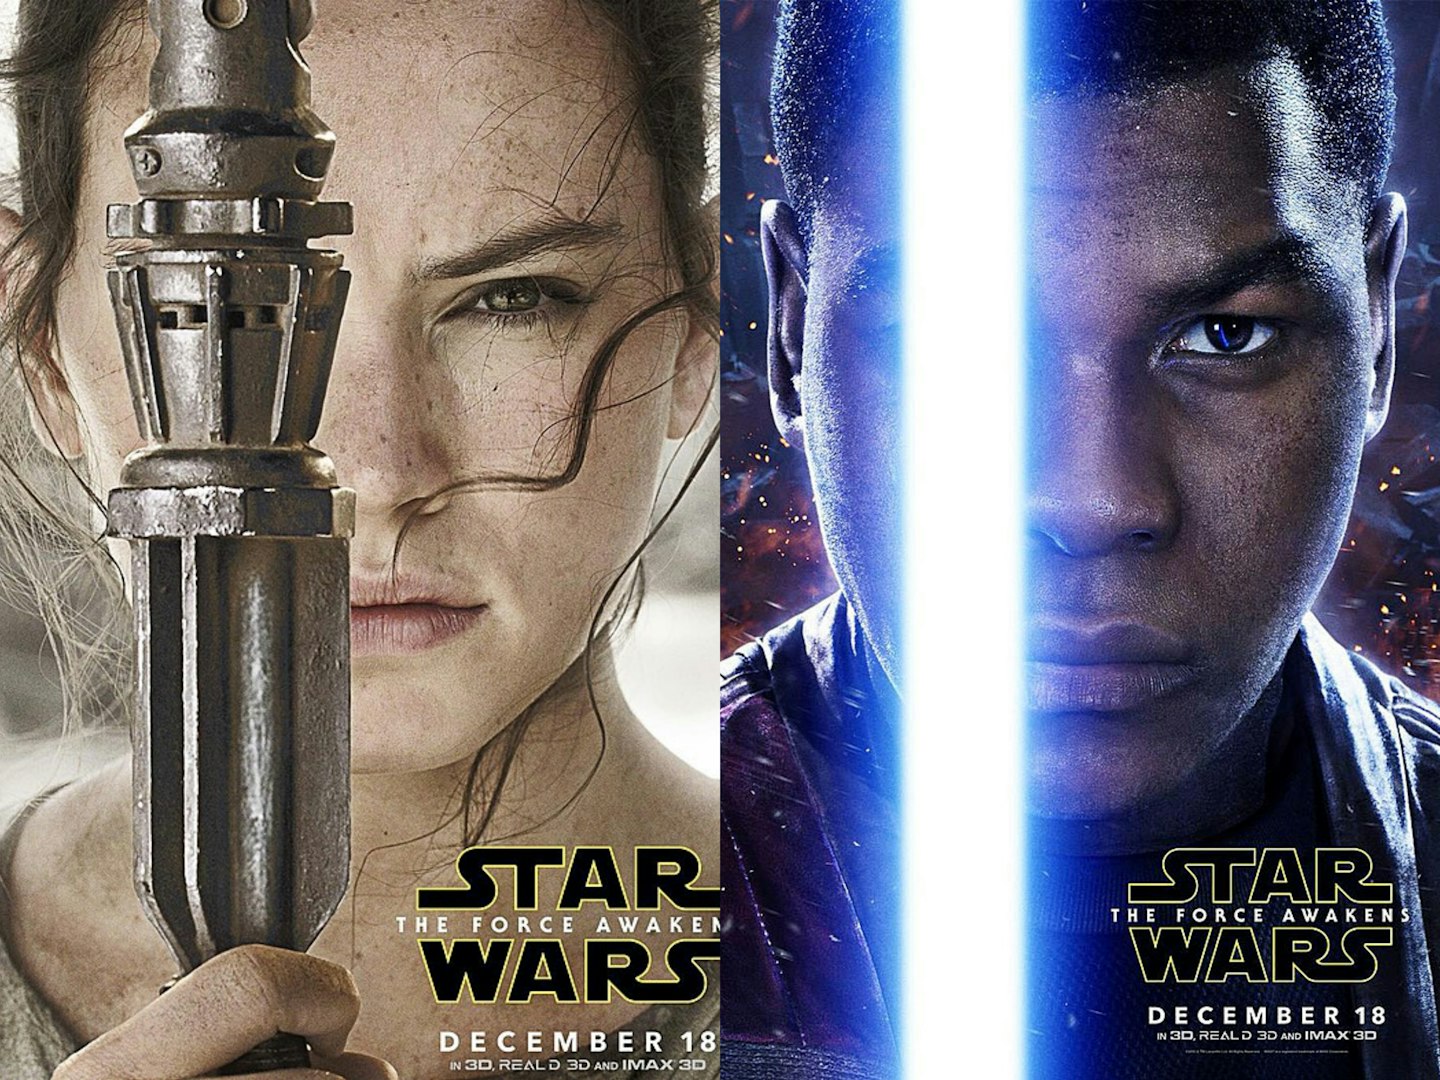 Star Wars The Force Awakens Rey Finn Character posters